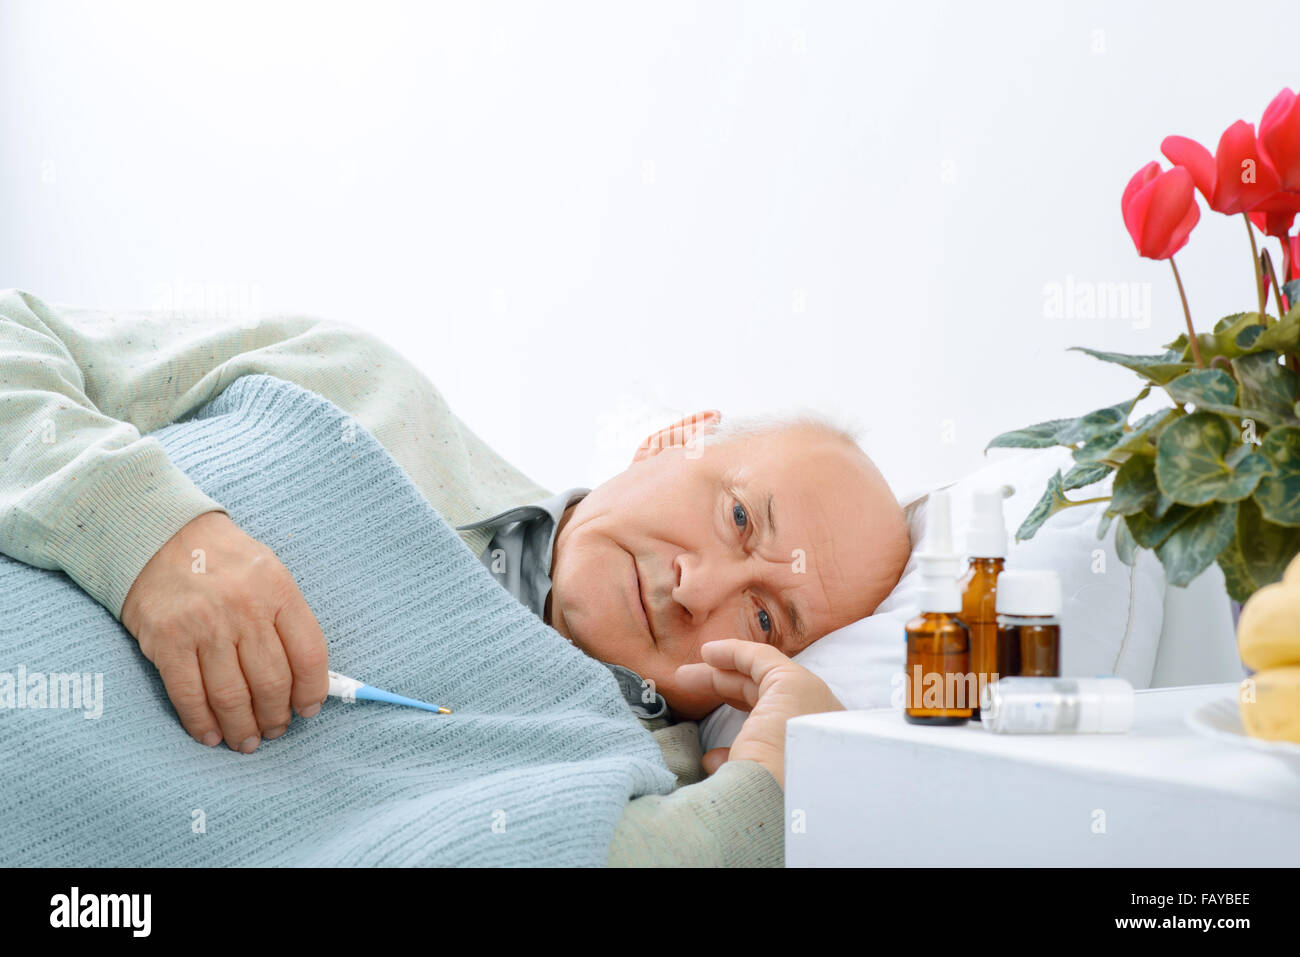 Senior aged man is resting while holding a thermometer. Stock Photo